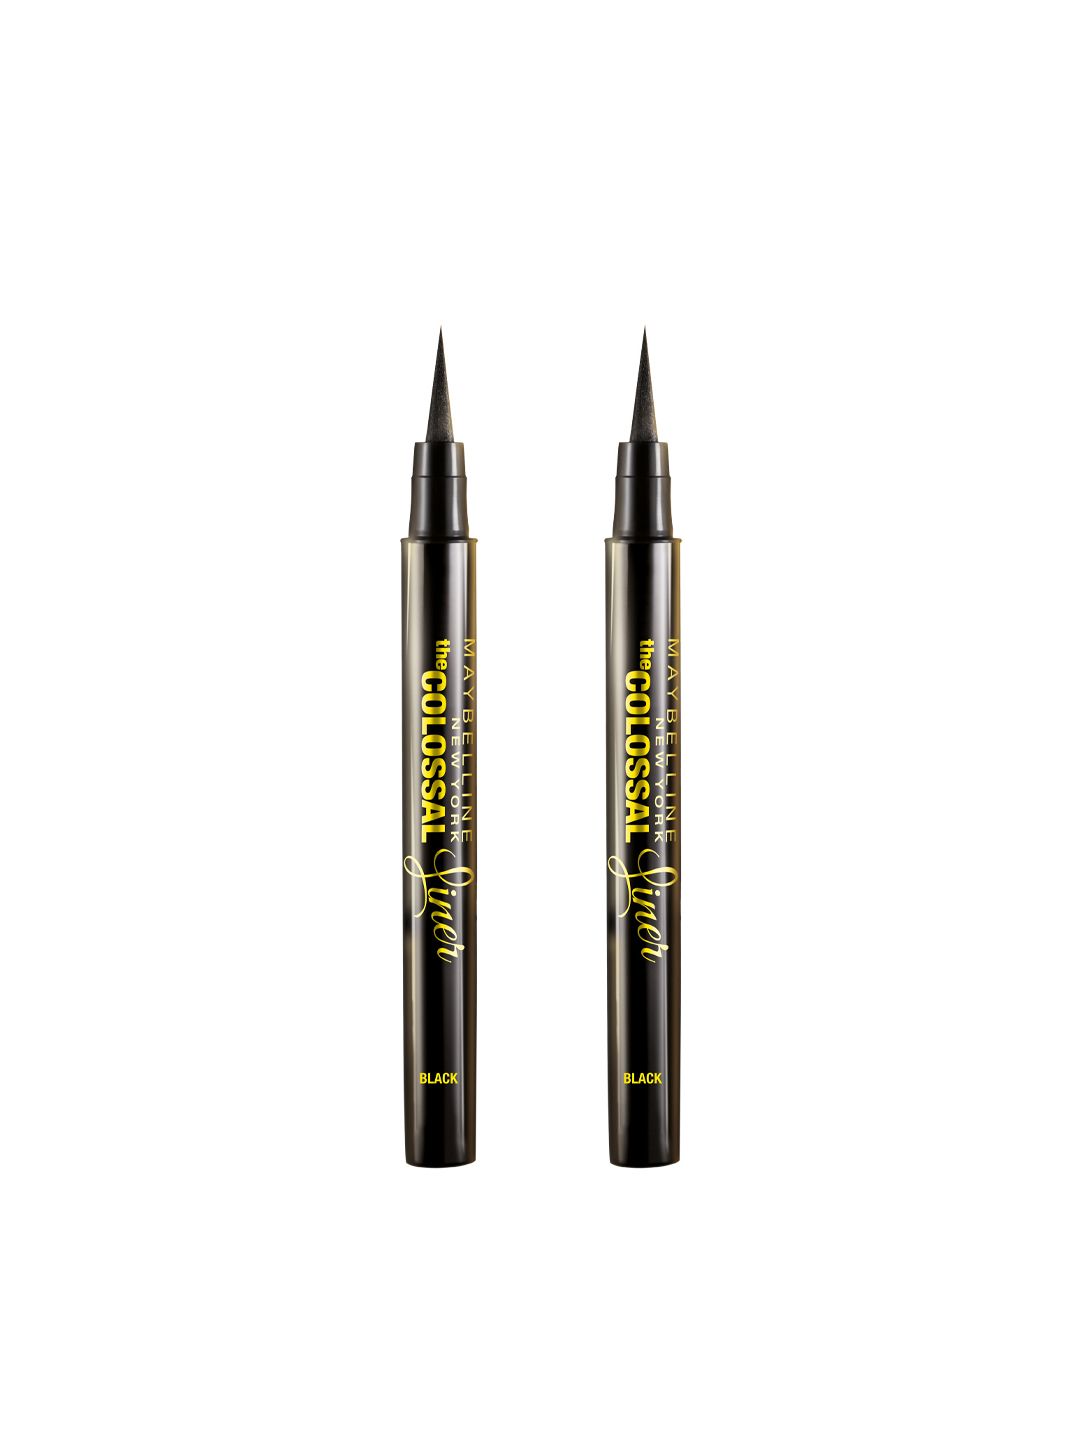 Maybelline Set of 2 The Colossal Black Eyeliners Price in India